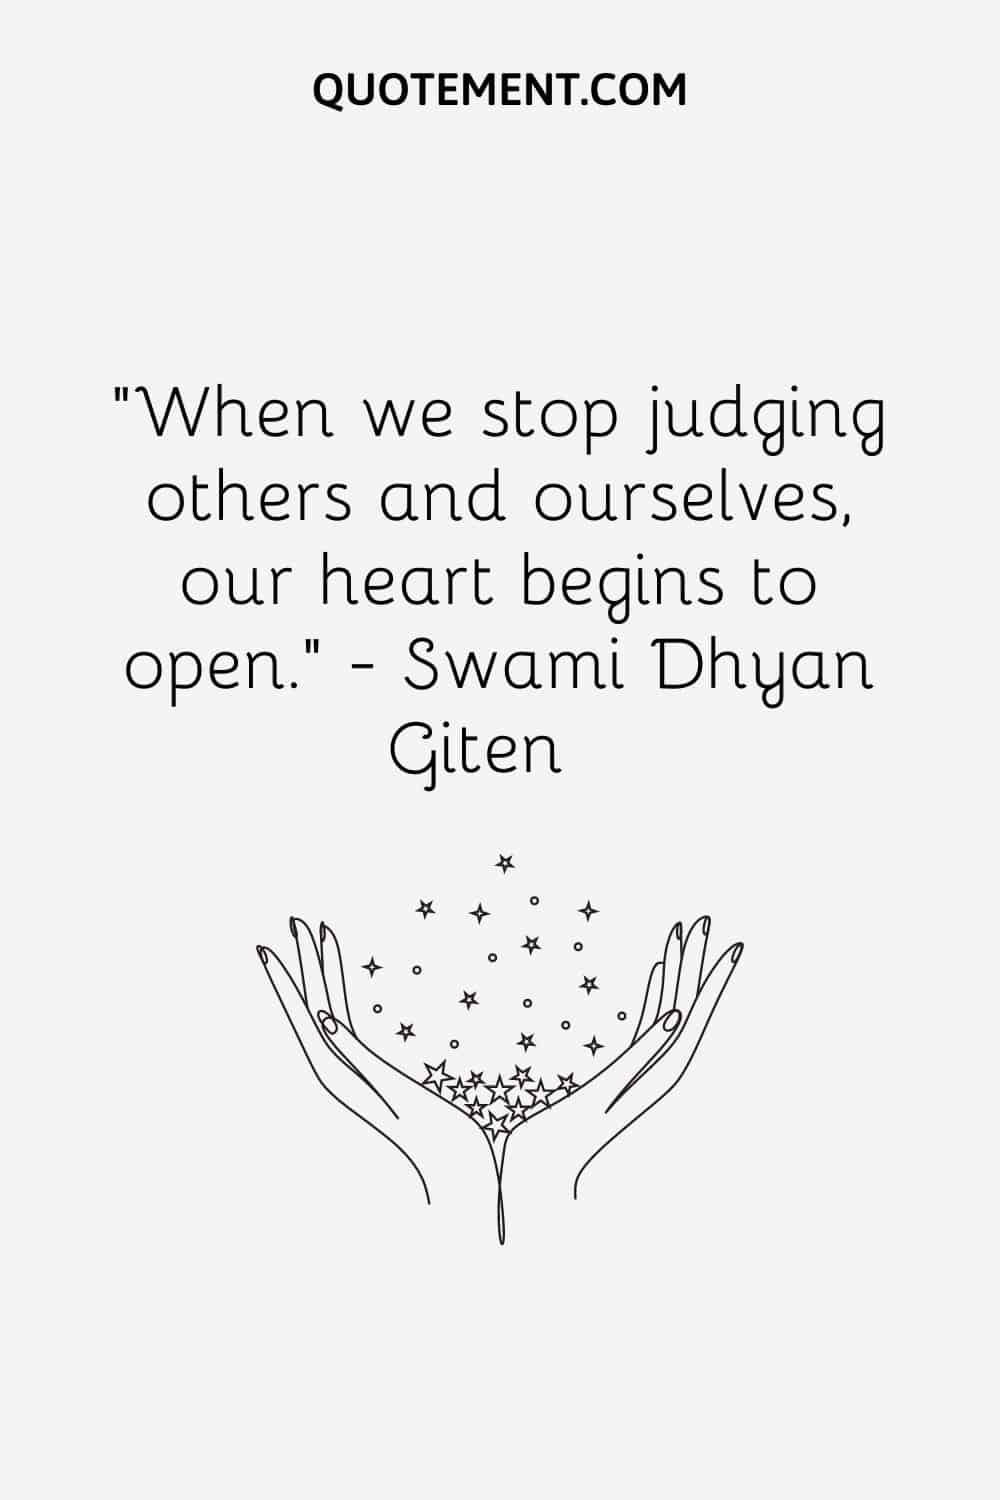 “When we stop judging others and ourselves, our heart begins to open.” — Swami Dhyan Giten